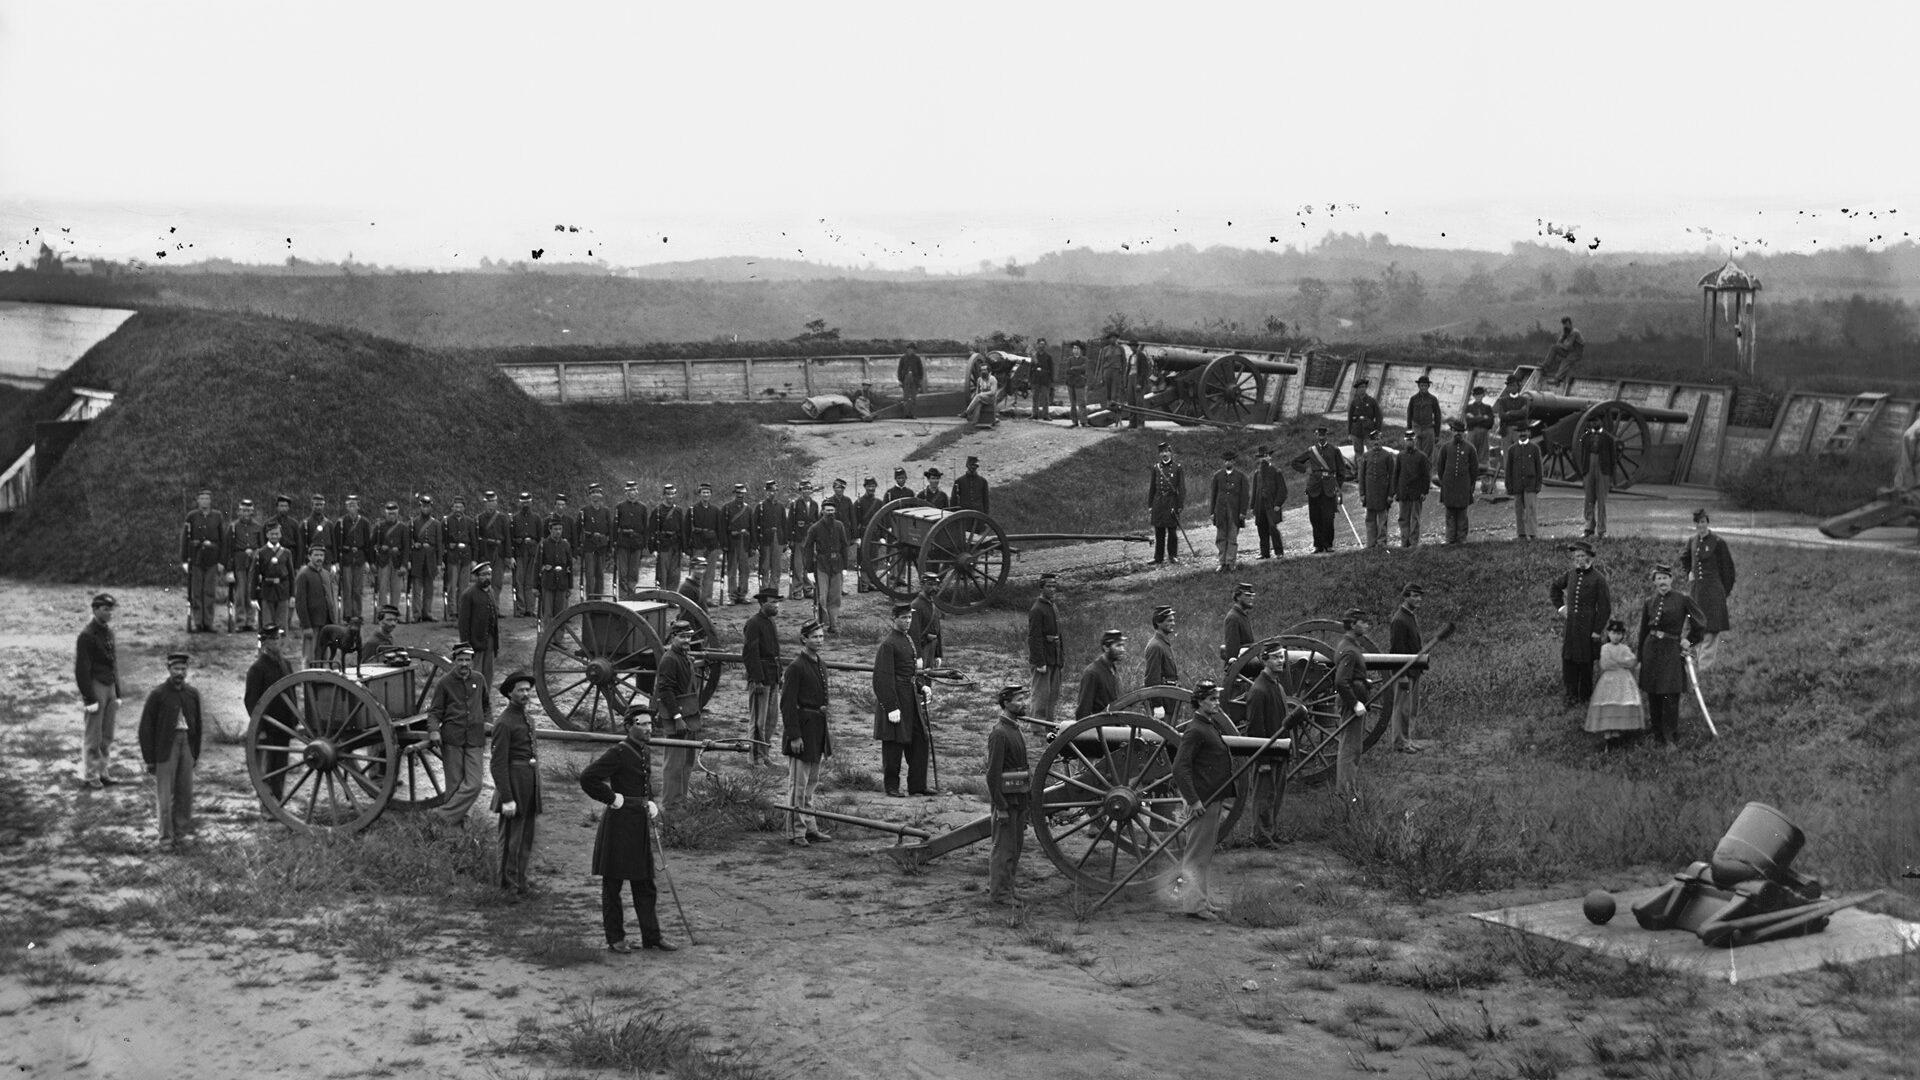 Company M of the 9th New York Heavy Artillery is shown in the Washington defenses. Lt. Gen. Ulysses S. Grant converted many of the artillery units defending the U.S. capital to infantry to compensate for losses in his Overland Campaign against General Robert E. Lee’s Army of Northern Virginia.